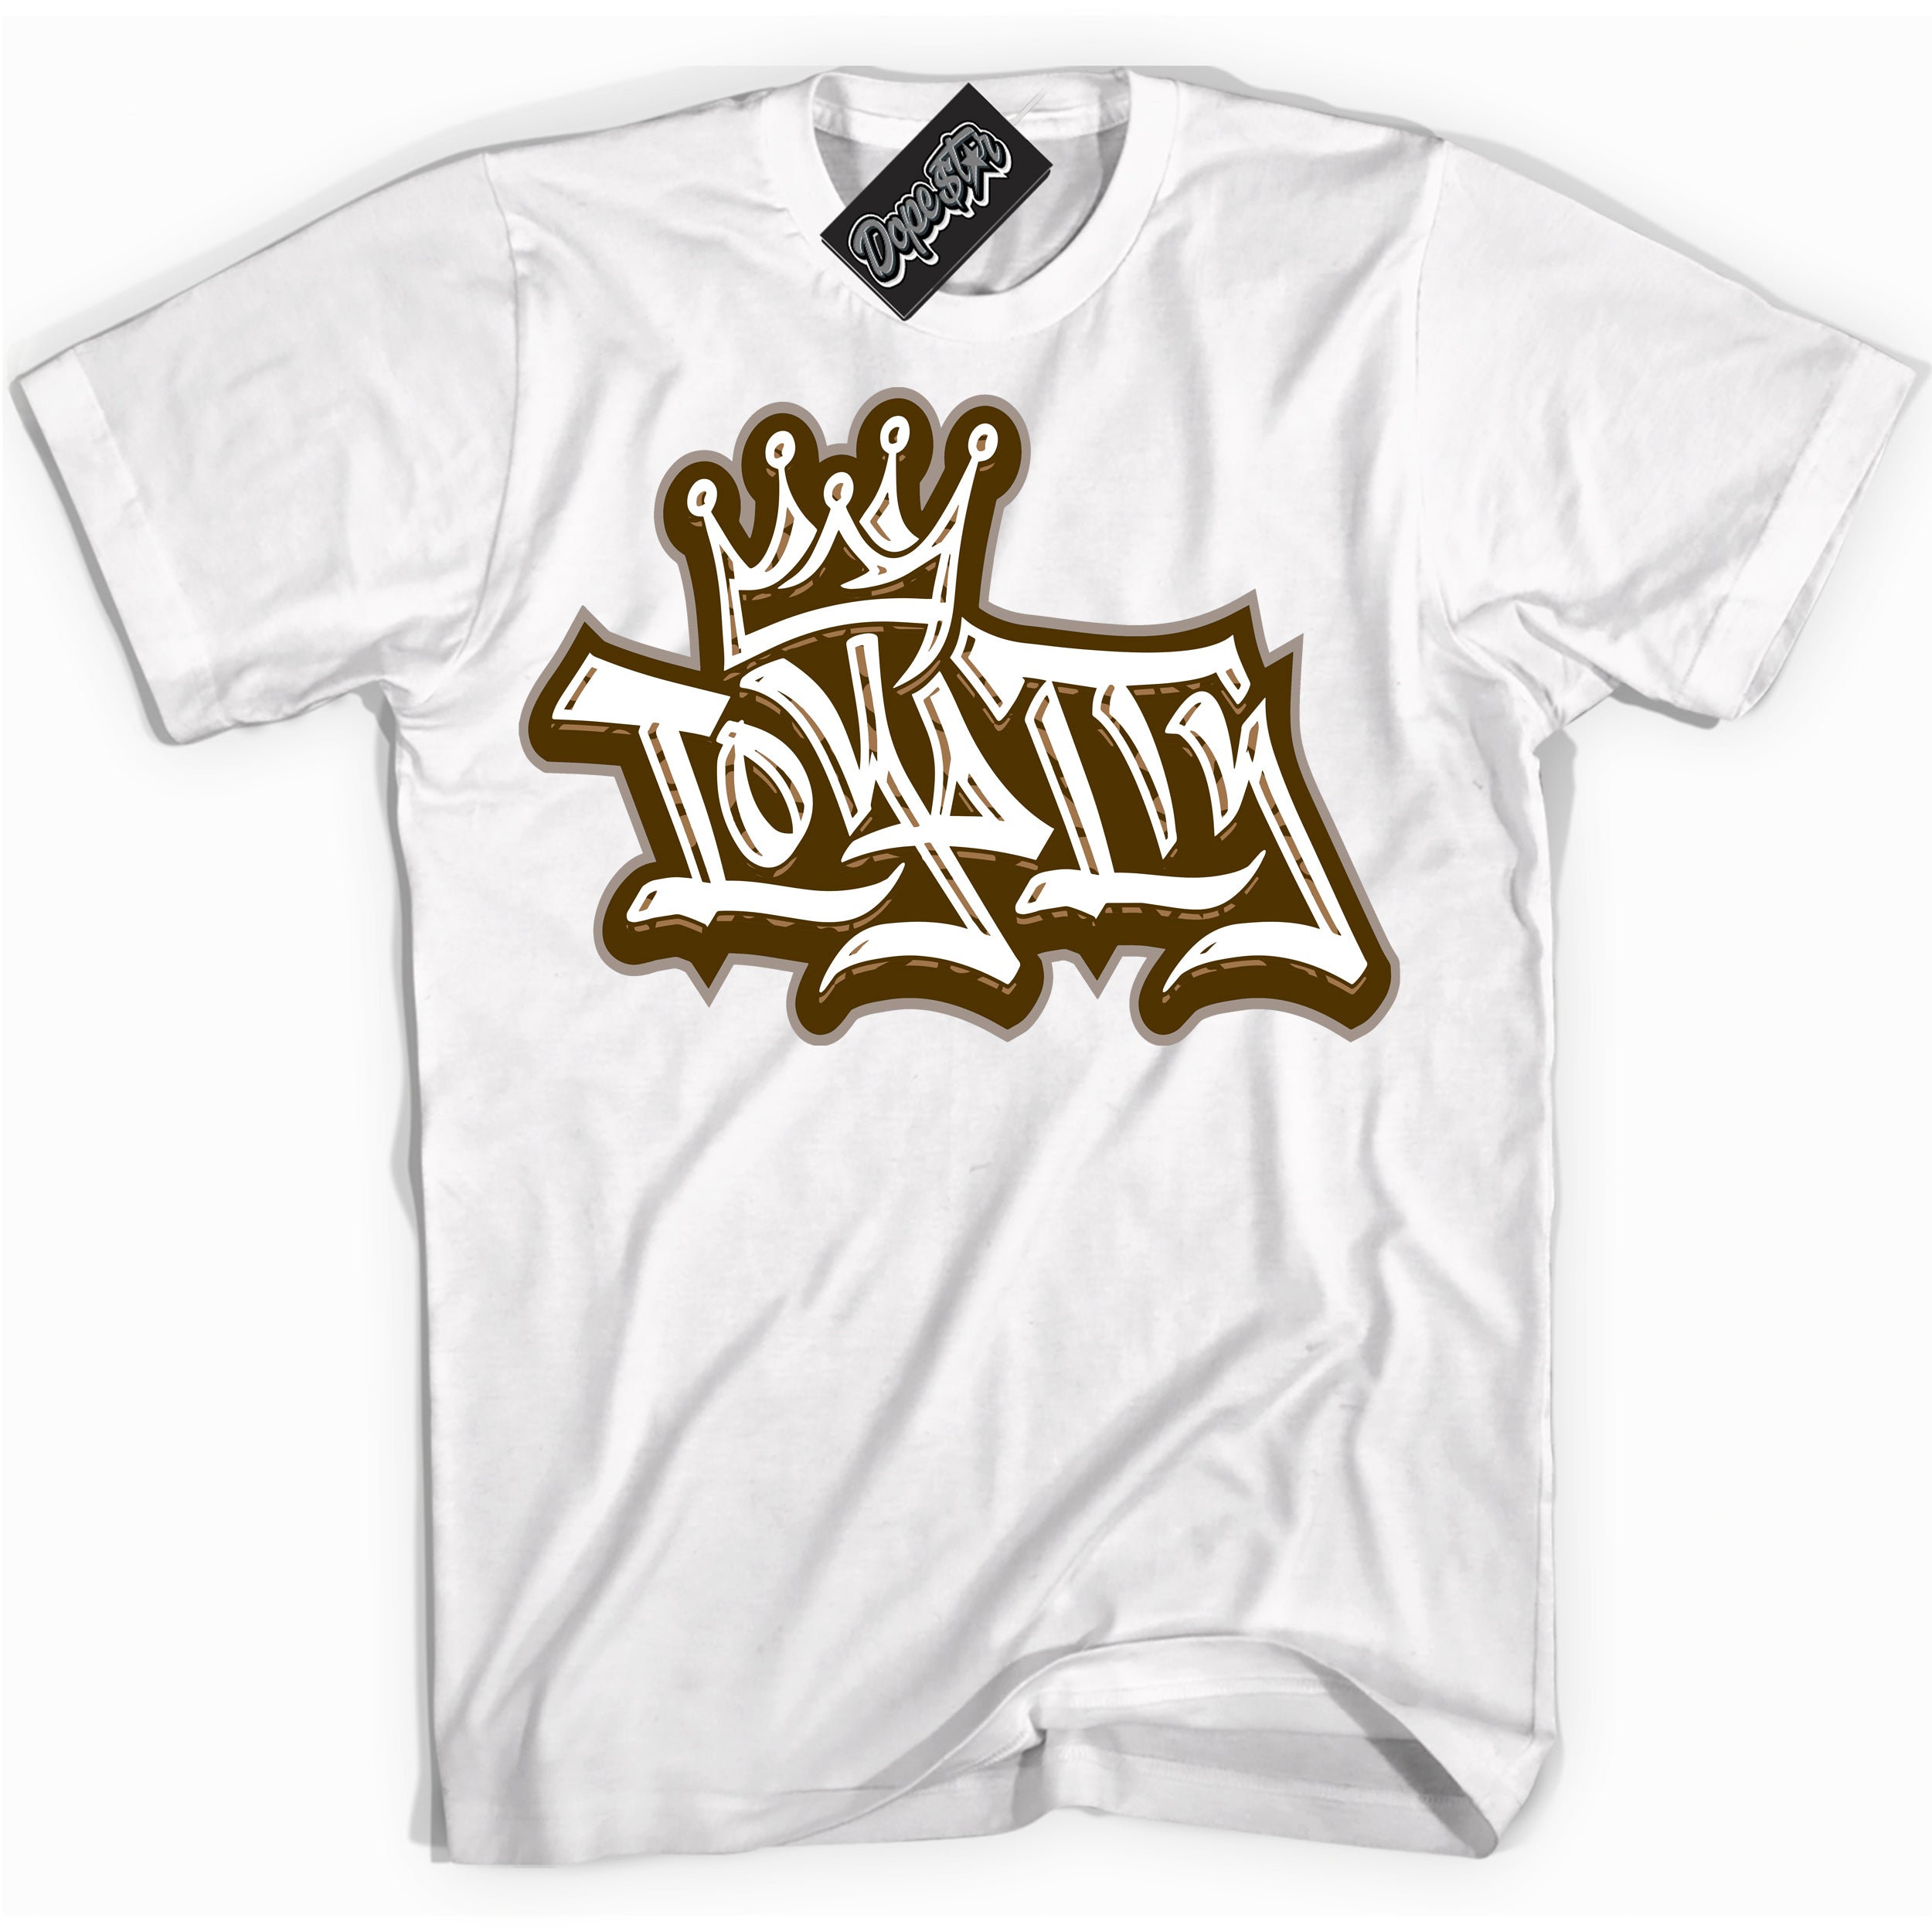 Cool White graphic tee with “ Loyalty Crown ” design, that perfectly matches Palomino 3s sneakers 